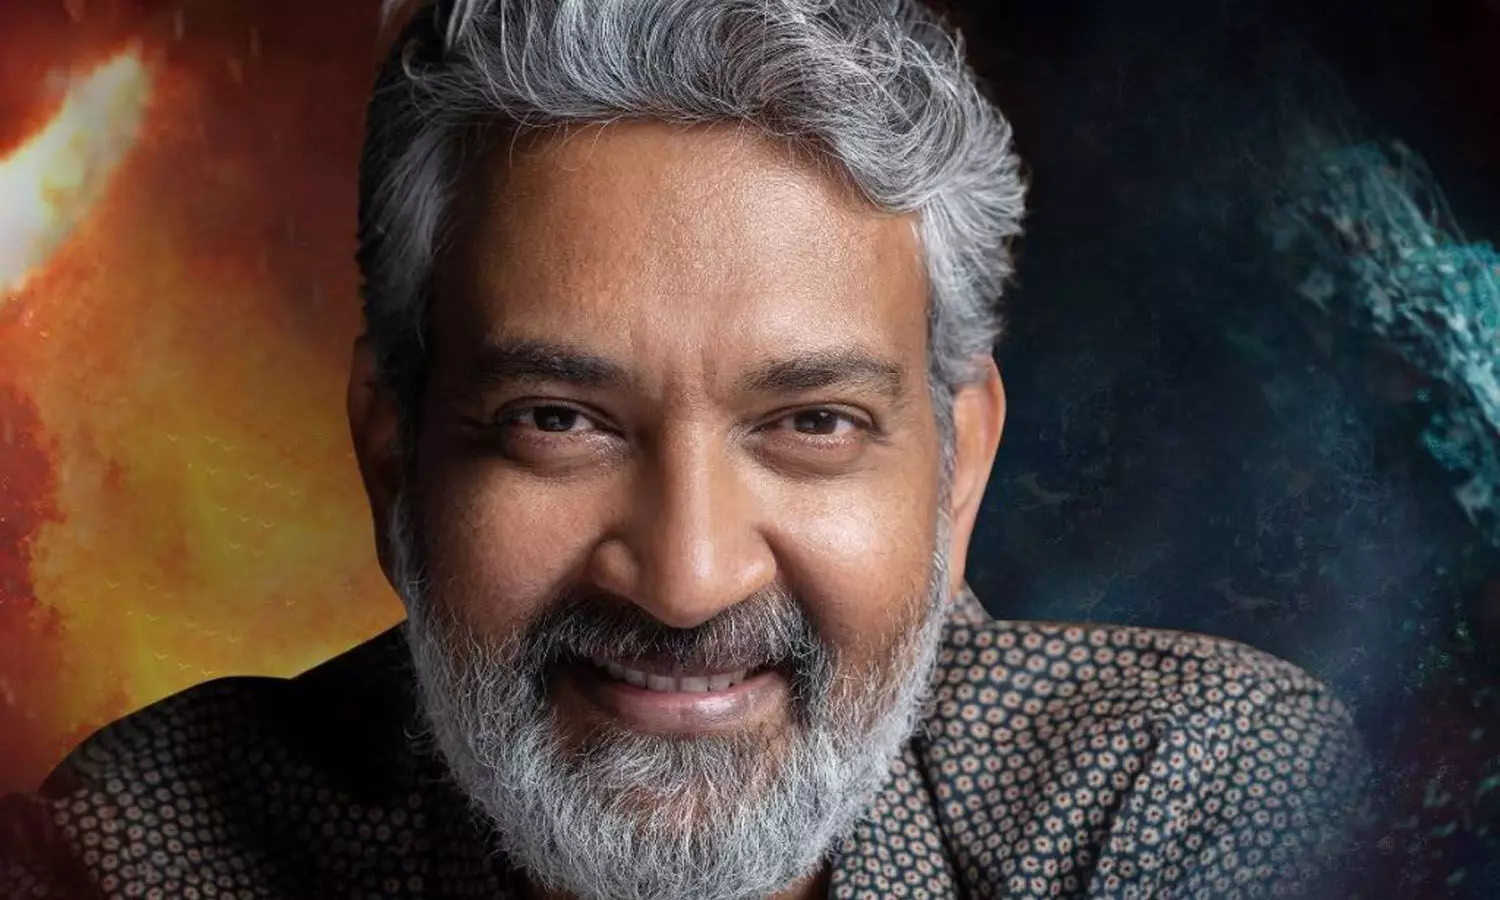 SS Rajamouli reacts to rumours of links with BJP